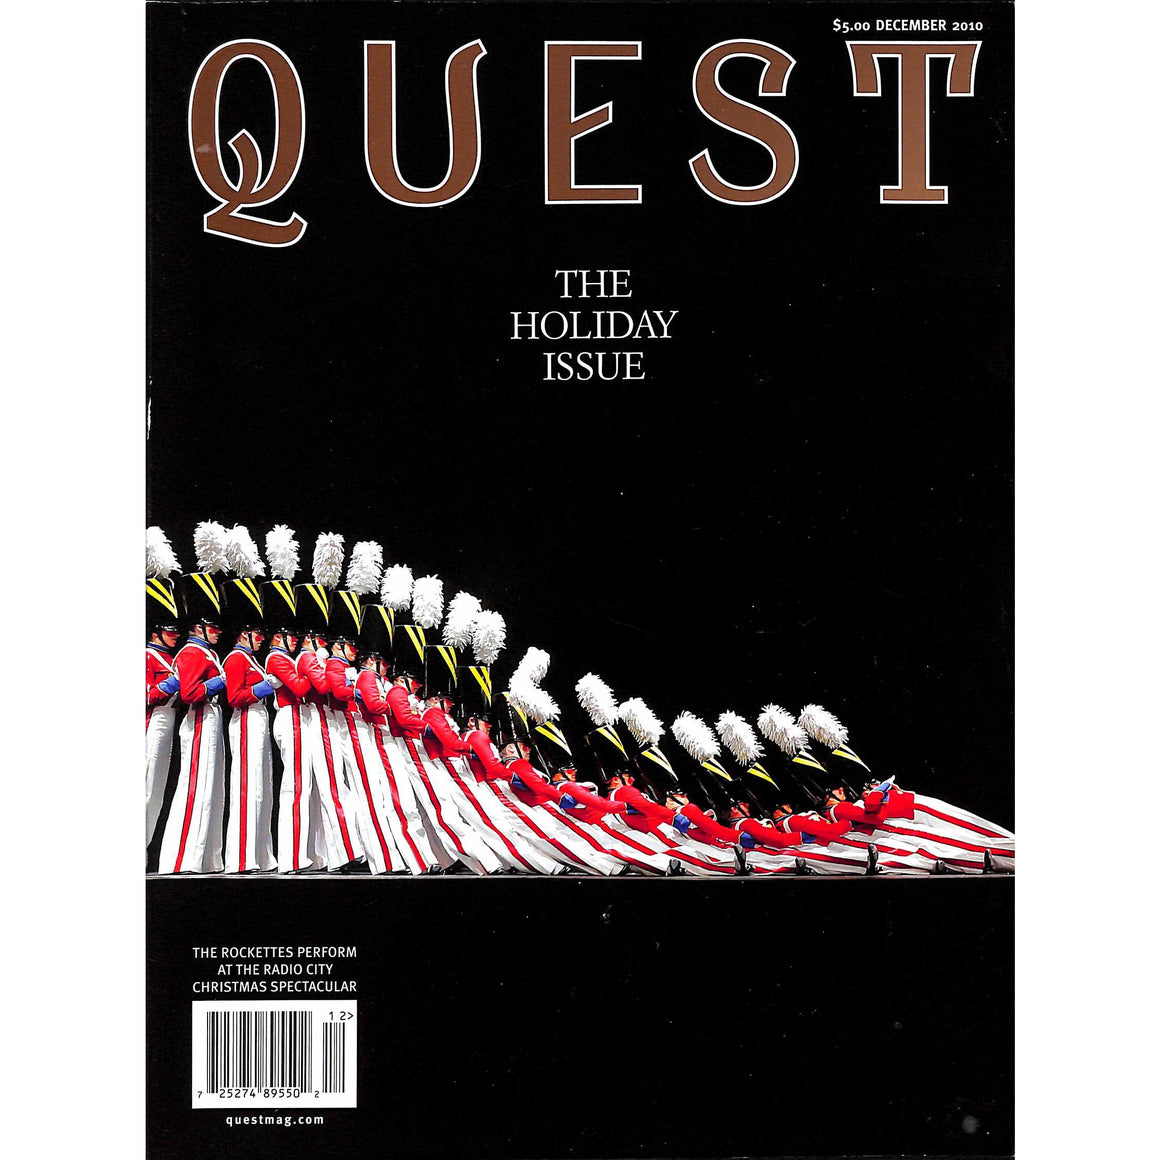 Quest Magazine: The Holiday Issue